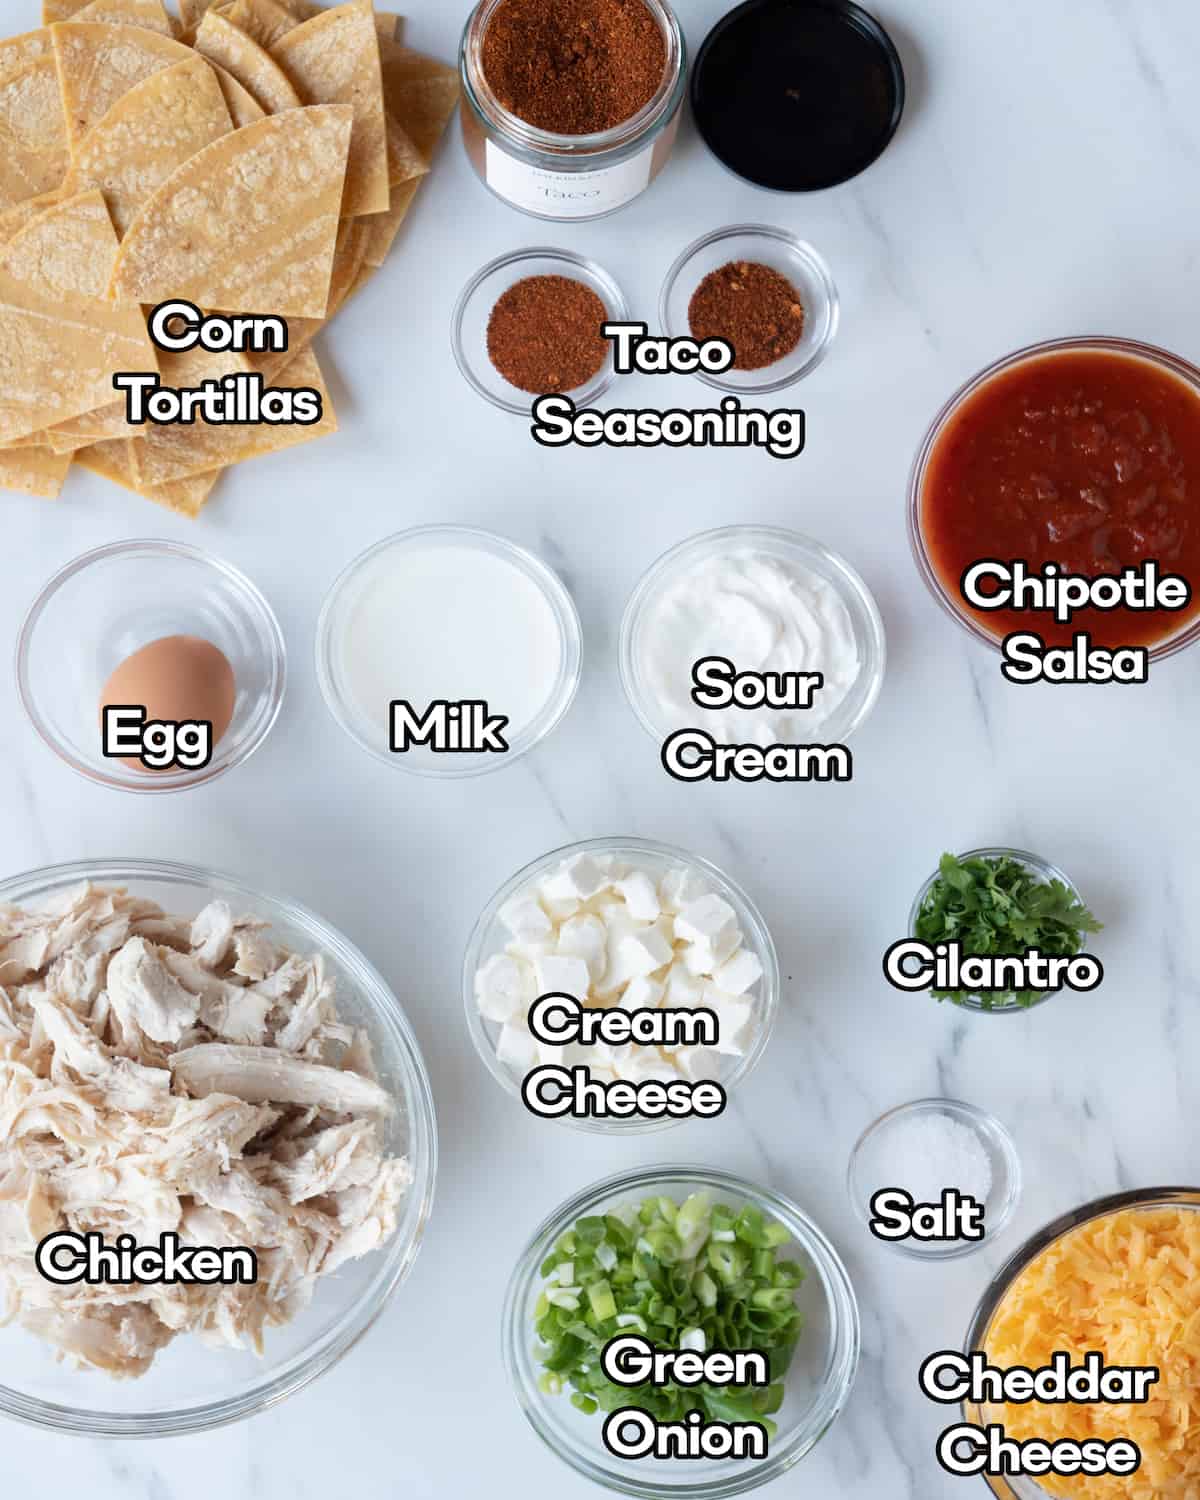 Ingredient shot of all ingredients in individual clear bowls including taco seasoning, corn tortillas, chipotle salsa, egg, milk, sour cream, cilantro, rotisserie chicken, green onion, cream cheese, and cheddar cheese on a white marbled countertop.